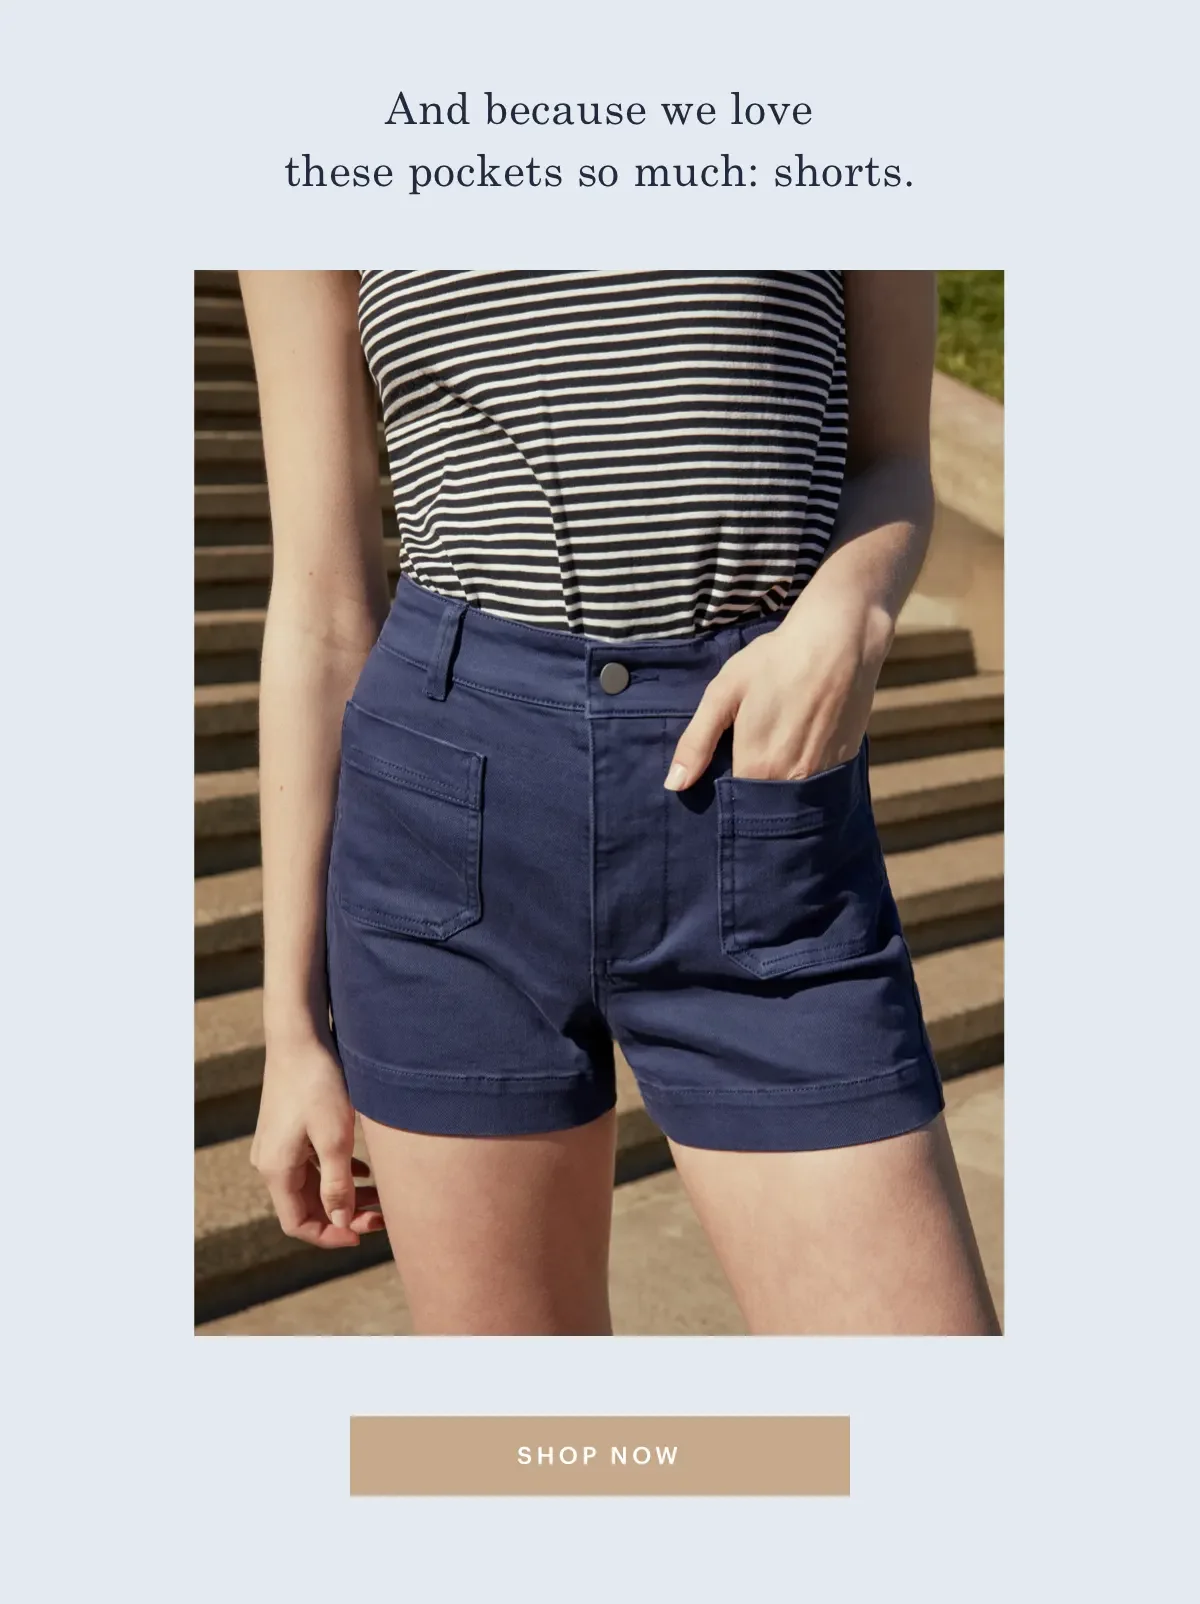 And because we love these pockets so much: shorts. SHOP NOW